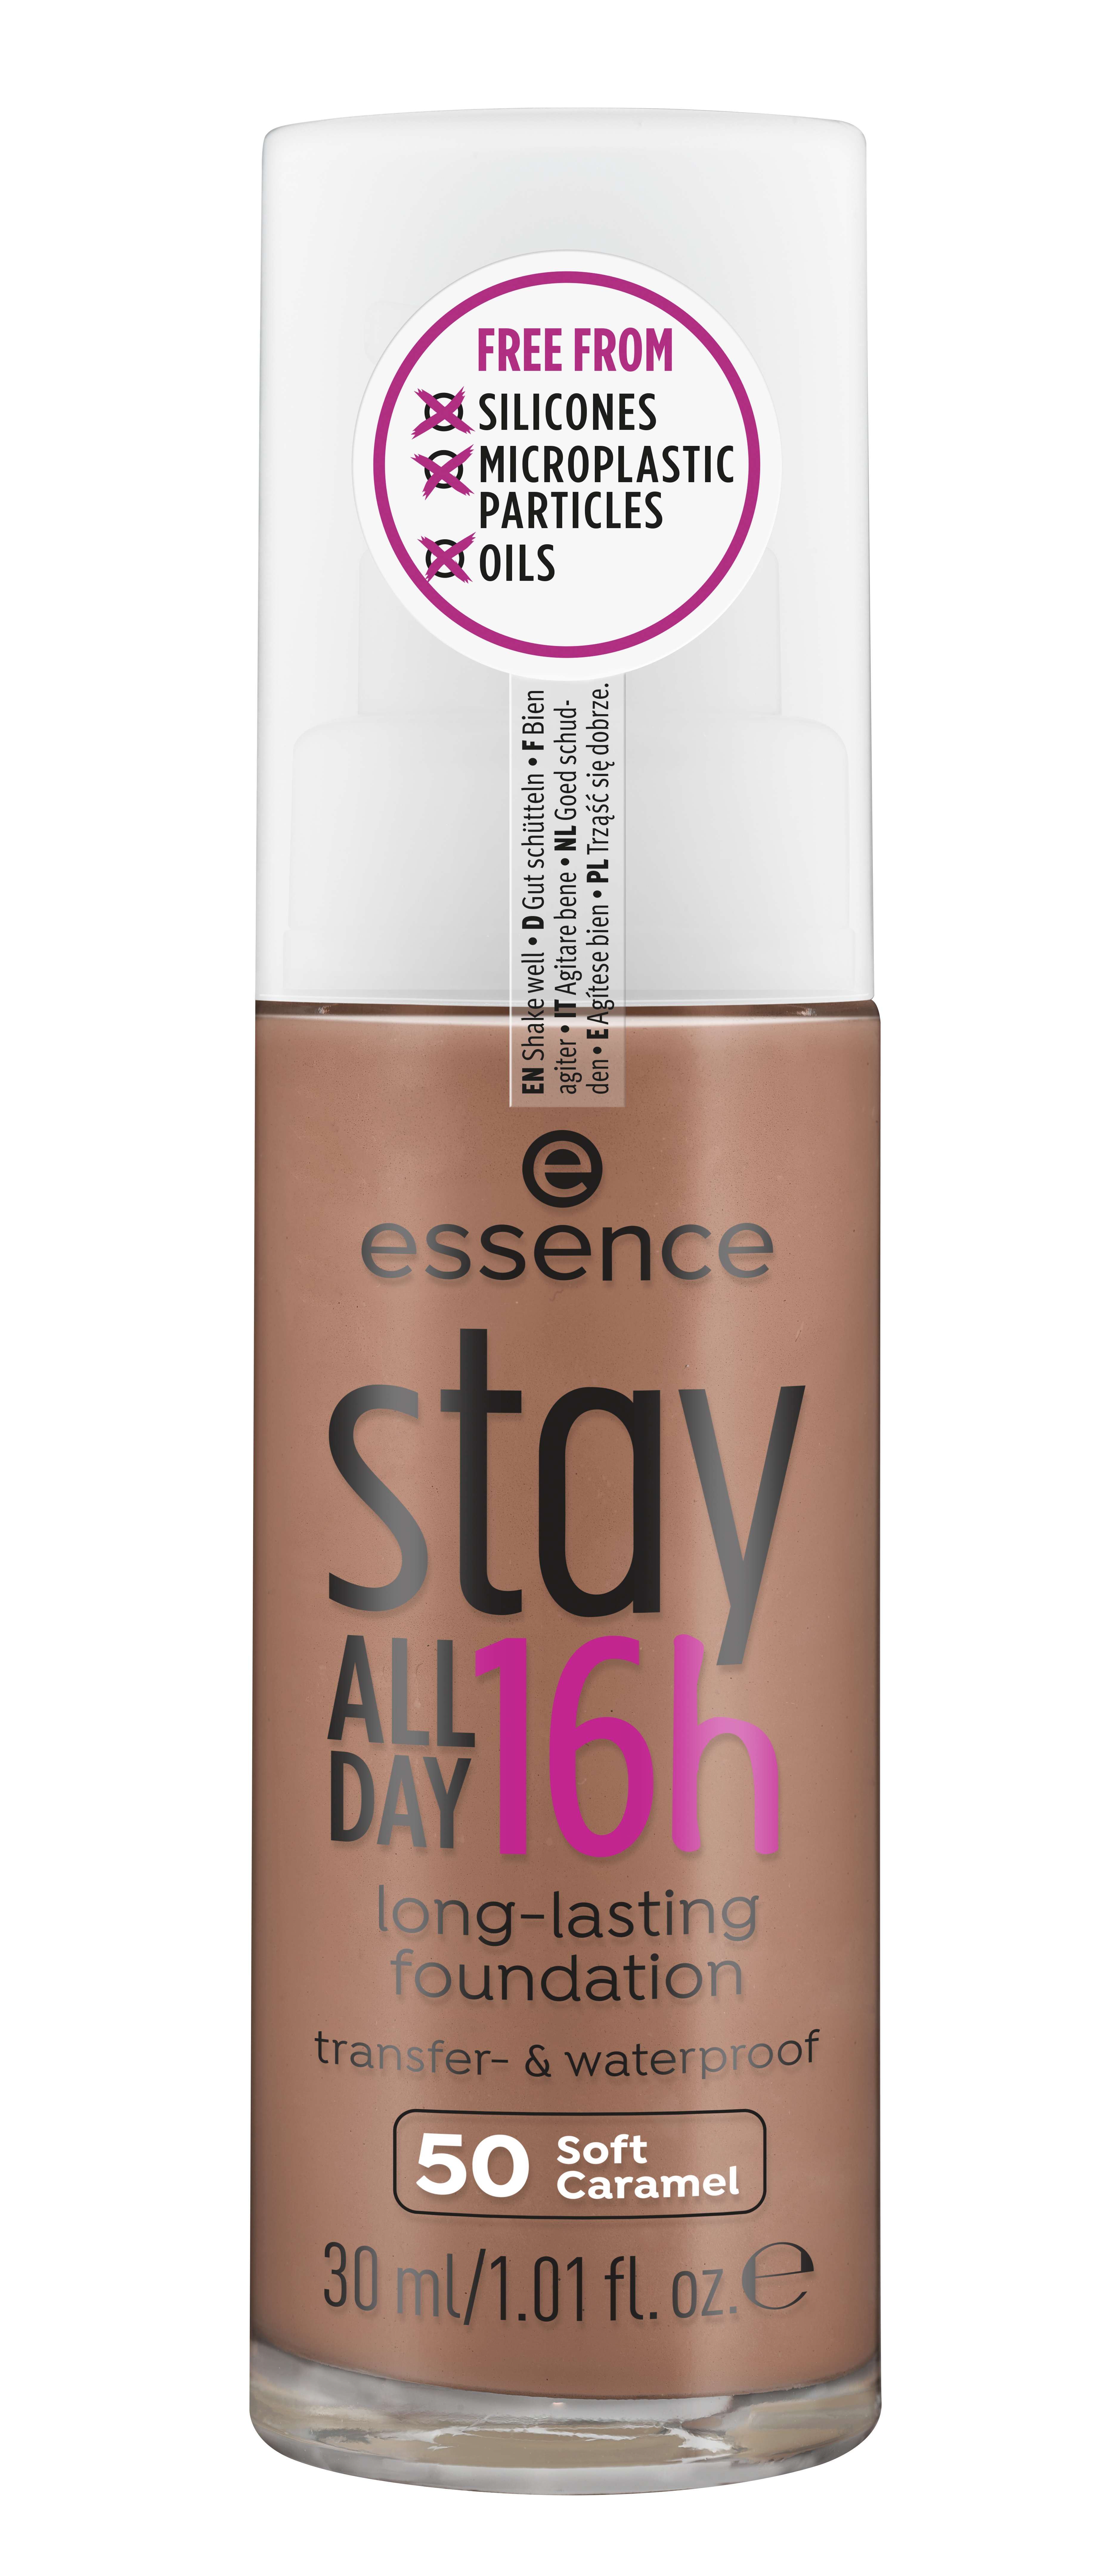 foundation long-lasting Soft all Sand 30 16h stay day essence